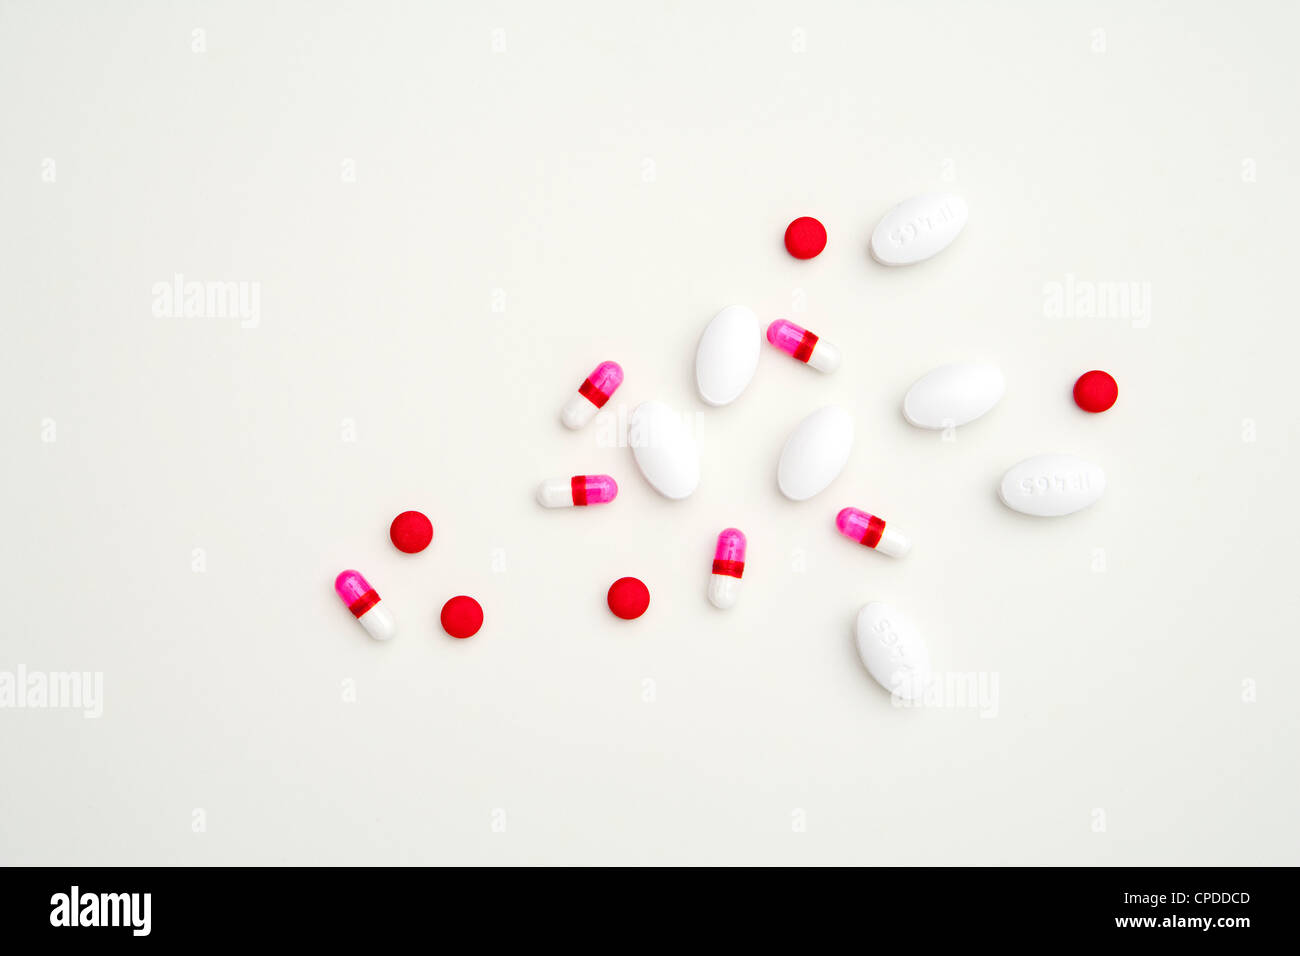 Scattered pills, capsules and tablets Stock Photo